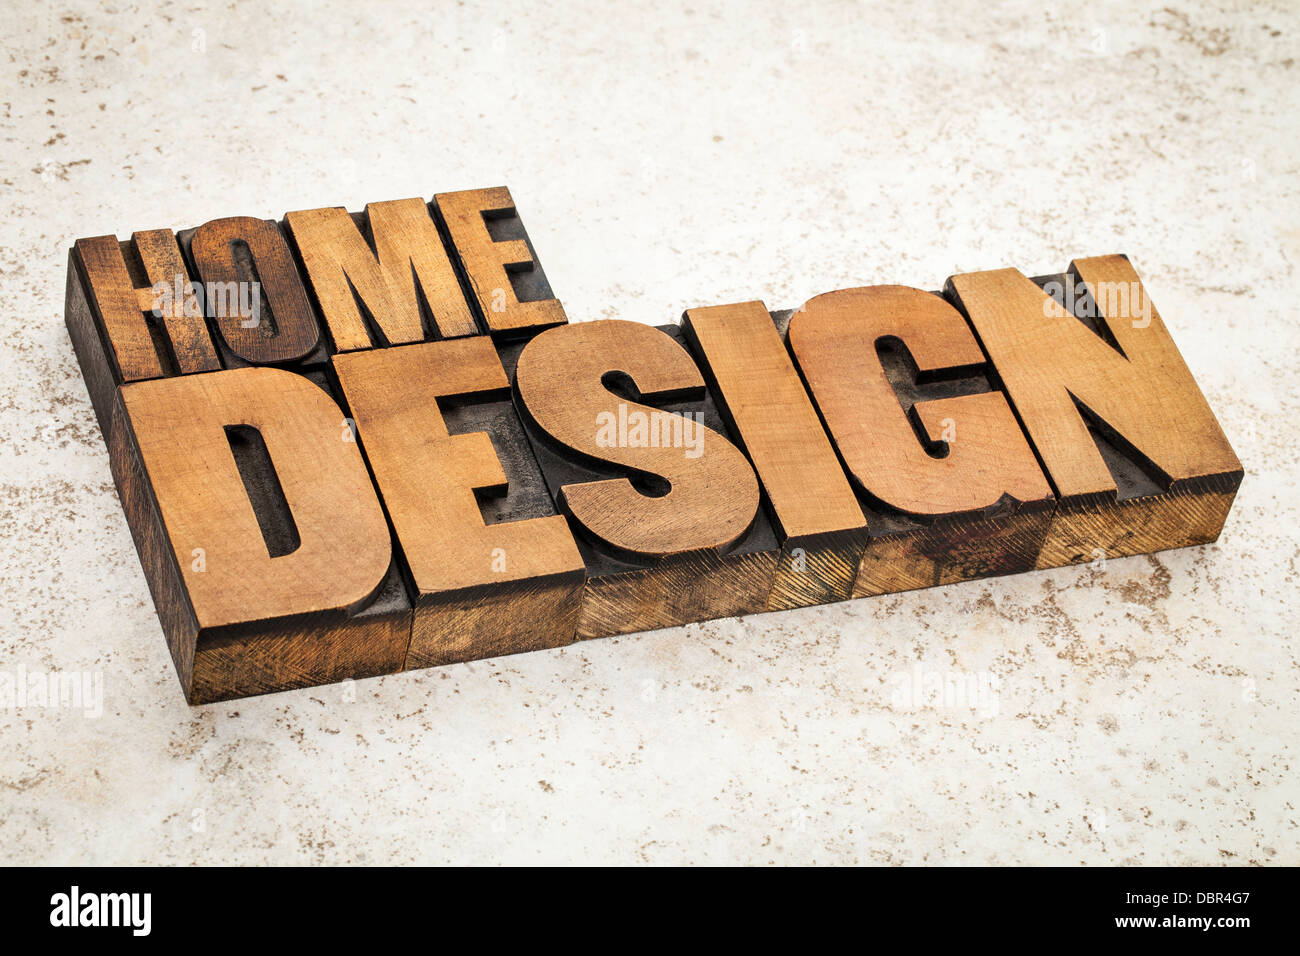 home design text in vintage letterpress wood type on a ceramic tile background Stock Photo